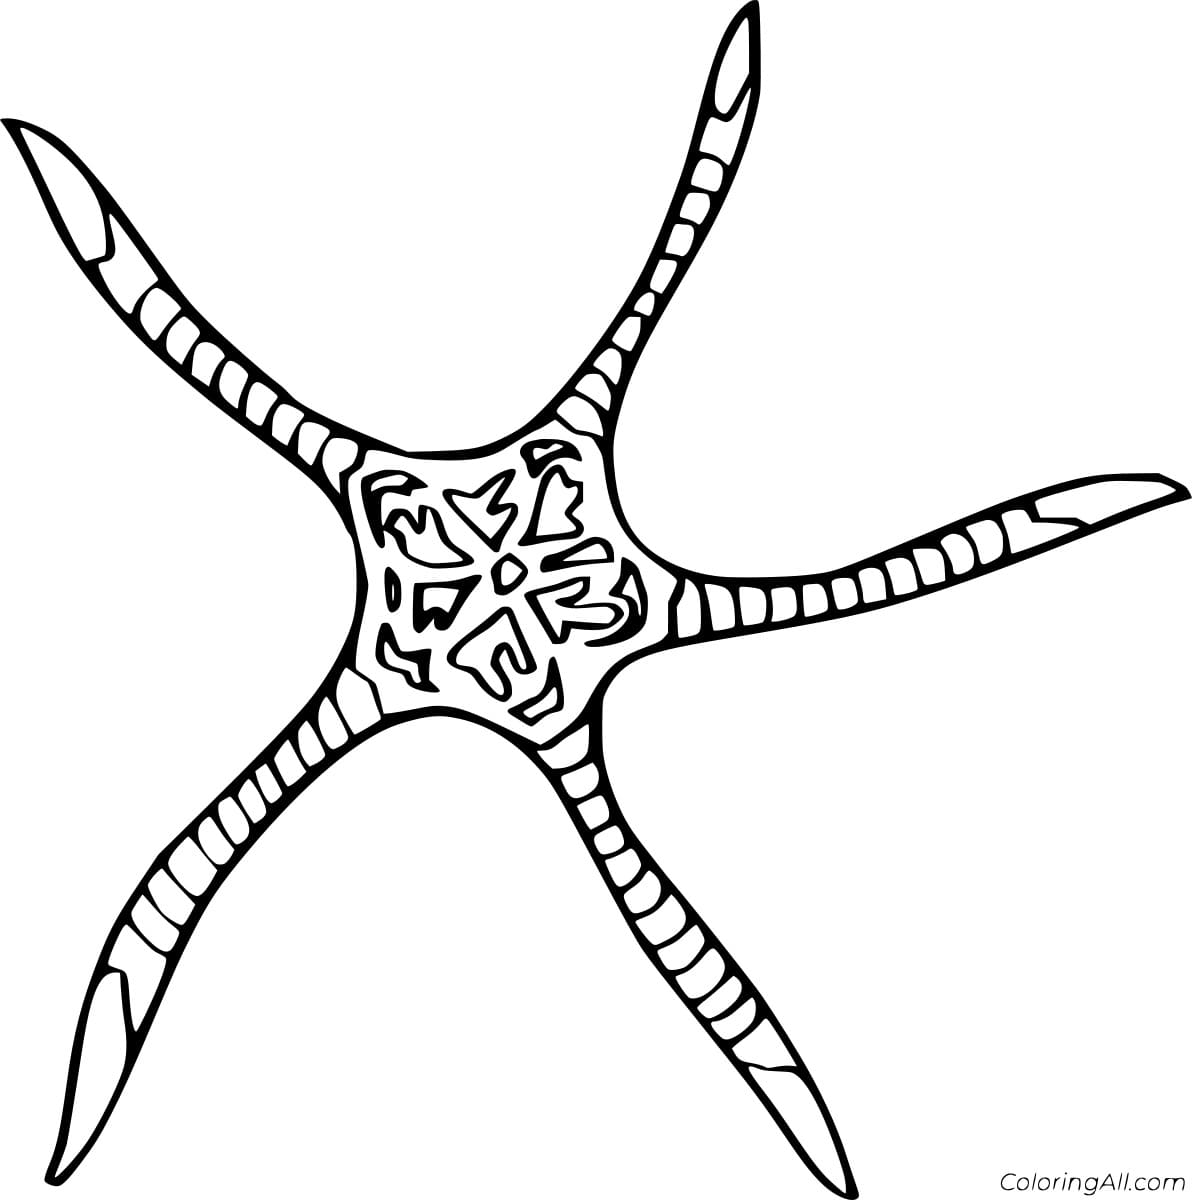 Icon Starfish Image Coloring Page